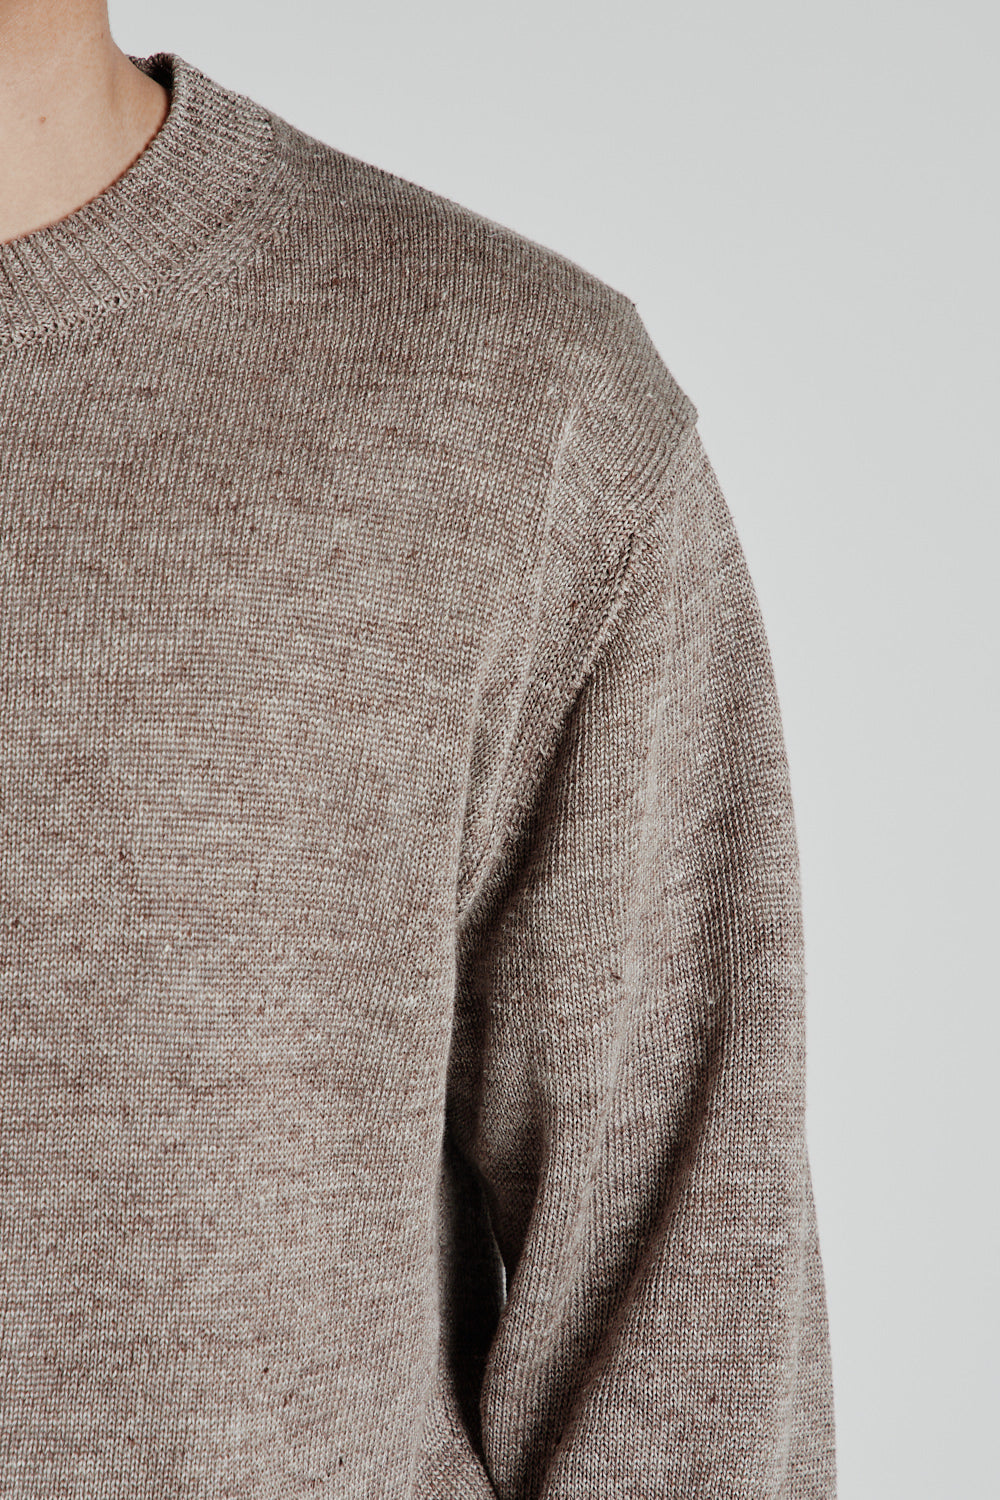 Washed High Count Linen Crew Neck - Brown